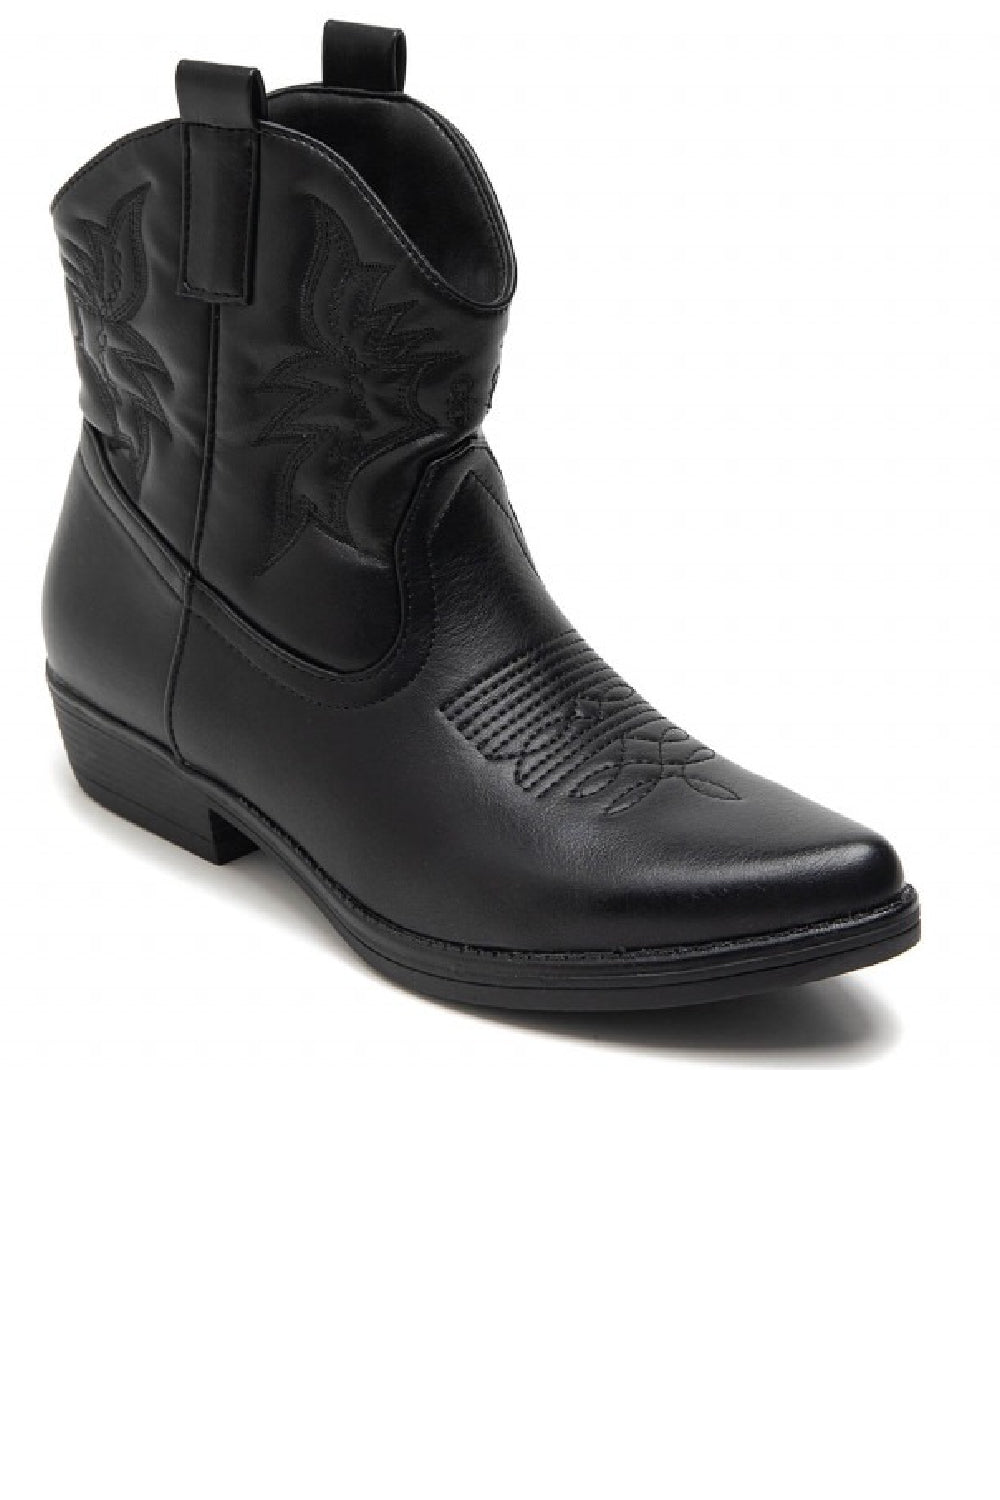 BLACK COWBOY BOOTS EMBROIDED FLAT WESTERN ANKLE BOOTS